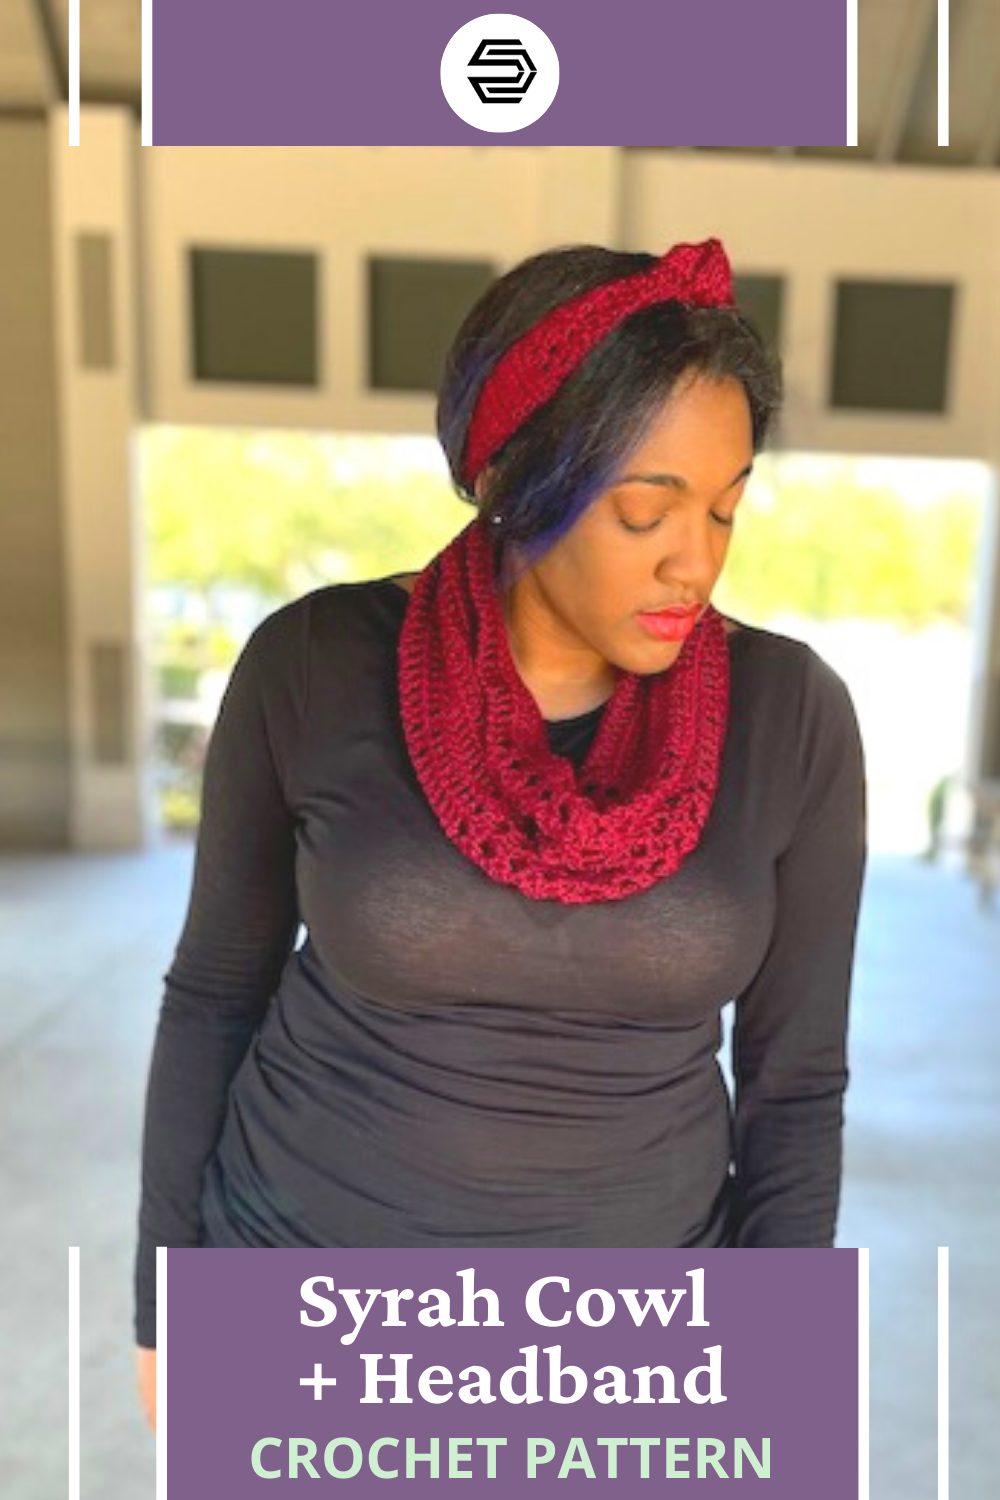 The Syrah Cowl and Knotted Headband crochet pattern is a fun make with a DK weight yarn. The lace section created by x-stitches add to the drape and style, where the knotted headband is a classic look with any hair style. Enjoy this free crochet pattern. #creationsbycourtney #bipocdesigner